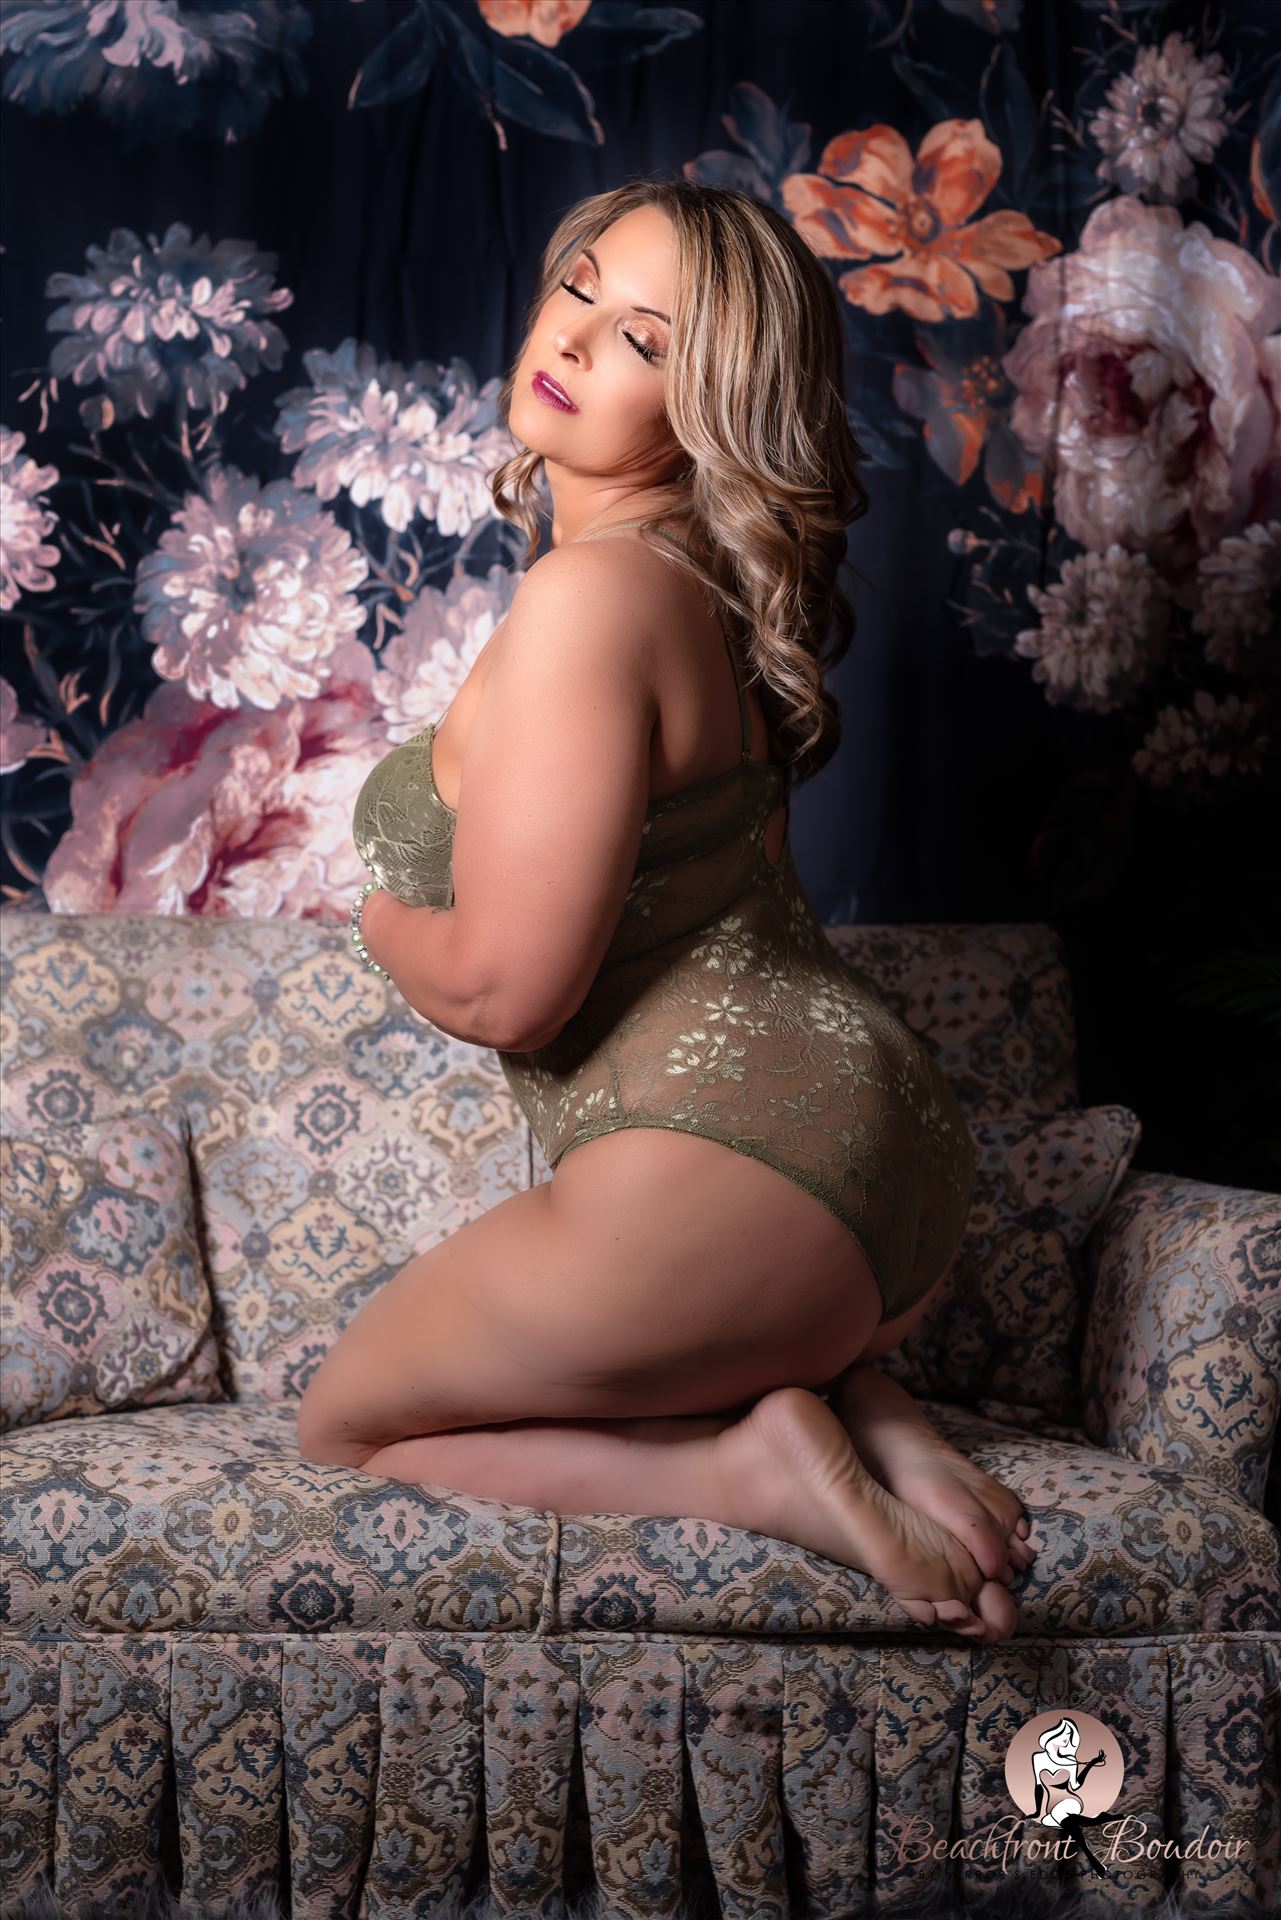 Port-2373.JPG - Beachfront Boudoir by Mirror's Edge Photography is a Boutique Luxury Boudoir Photography Studio located just blocks from the beach in Oceano, California. My mission is to show as many women as possible how beautiful they truly are! by Sarah Williams